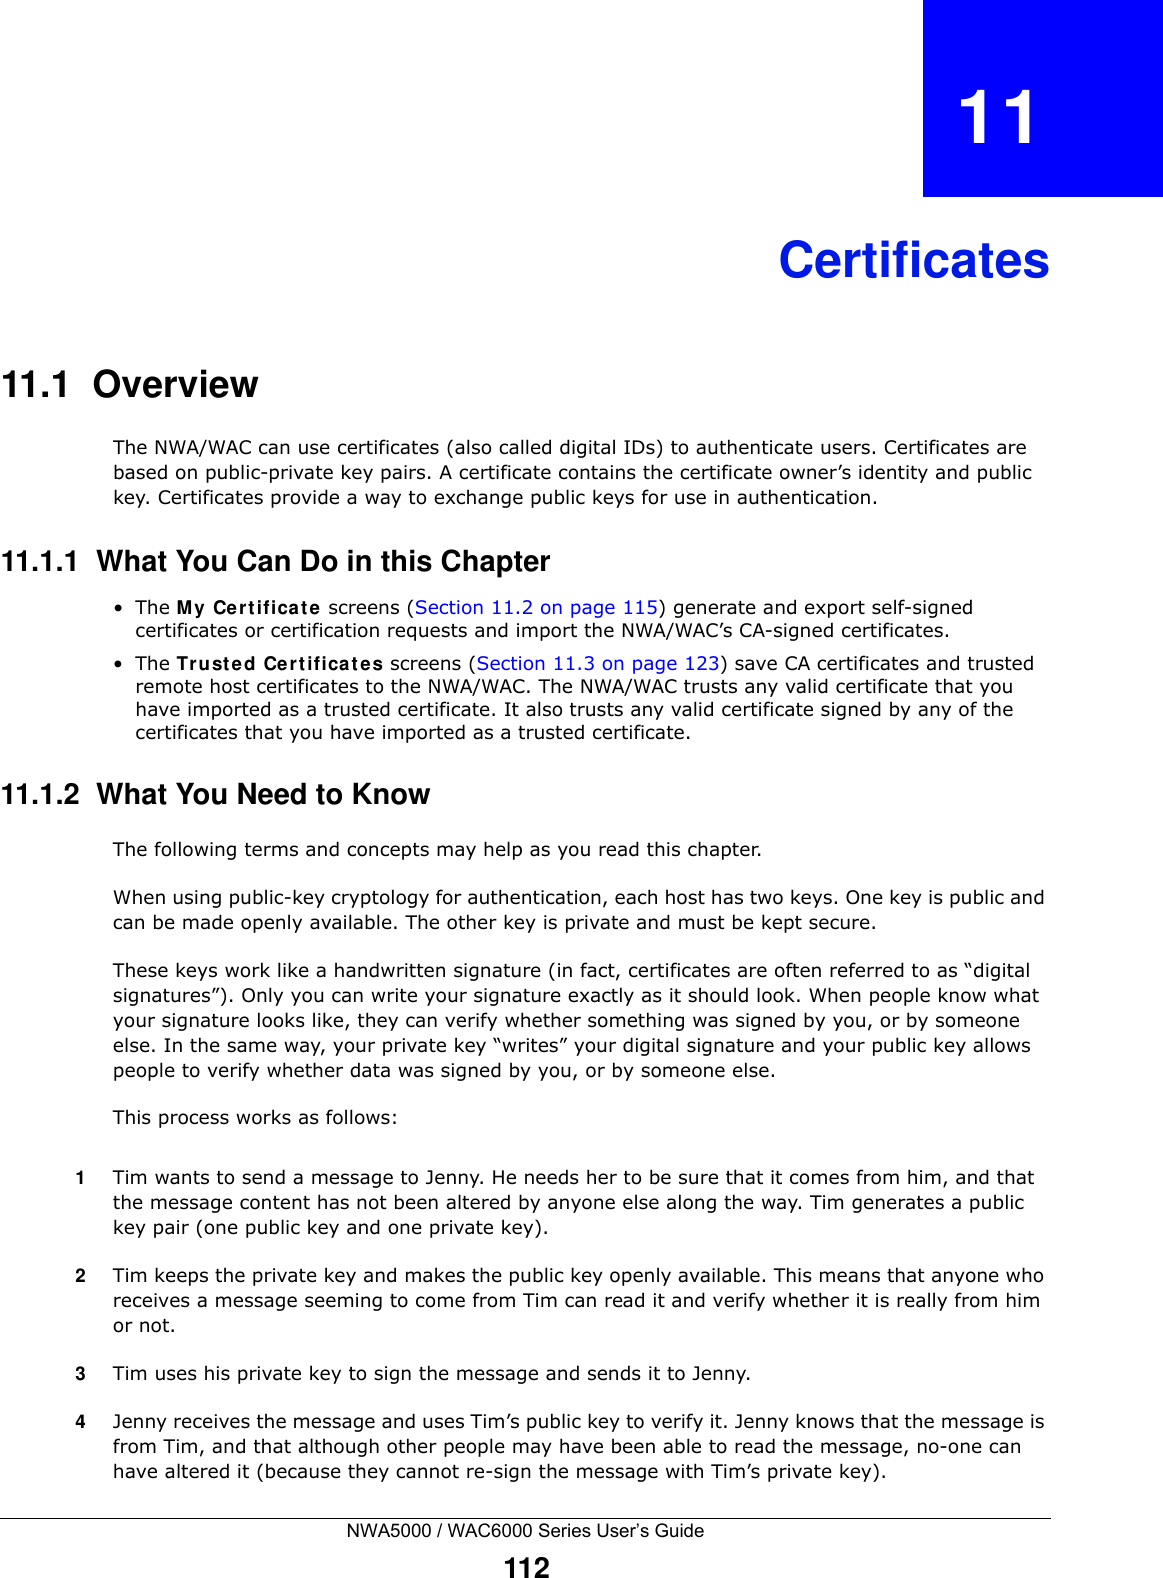 NWA5000 / WAC6000 Series User’s Guide112CHAPTER   11Certificates11.1  OverviewThe NWA/WAC can use certificates (also called digital IDs) to authenticate users. Certificates are based on public-private key pairs. A certificate contains the certificate owner’s identity and public key. Certificates provide a way to exchange public keys for use in authentication. 11.1.1  What You Can Do in this Chapter•The My Certificate screens (Section 11.2 on page 115) generate and export self-signed certificates or certification requests and import the NWA/WAC’s CA-signed certificates.•The Trusted Certificates screens (Section 11.3 on page 123) save CA certificates and trusted remote host certificates to the NWA/WAC. The NWA/WAC trusts any valid certificate that you have imported as a trusted certificate. It also trusts any valid certificate signed by any of the certificates that you have imported as a trusted certificate. 11.1.2  What You Need to KnowThe following terms and concepts may help as you read this chapter.When using public-key cryptology for authentication, each host has two keys. One key is public and can be made openly available. The other key is private and must be kept secure. These keys work like a handwritten signature (in fact, certificates are often referred to as “digital signatures”). Only you can write your signature exactly as it should look. When people know what your signature looks like, they can verify whether something was signed by you, or by someone else. In the same way, your private key “writes” your digital signature and your public key allows people to verify whether data was signed by you, or by someone else. This process works as follows:1Tim wants to send a message to Jenny. He needs her to be sure that it comes from him, and that the message content has not been altered by anyone else along the way. Tim generates a public key pair (one public key and one private key). 2Tim keeps the private key and makes the public key openly available. This means that anyone who receives a message seeming to come from Tim can read it and verify whether it is really from him or not. 3Tim uses his private key to sign the message and sends it to Jenny.4Jenny receives the message and uses Tim’s public key to verify it. Jenny knows that the message is from Tim, and that although other people may have been able to read the message, no-one can have altered it (because they cannot re-sign the message with Tim’s private key).